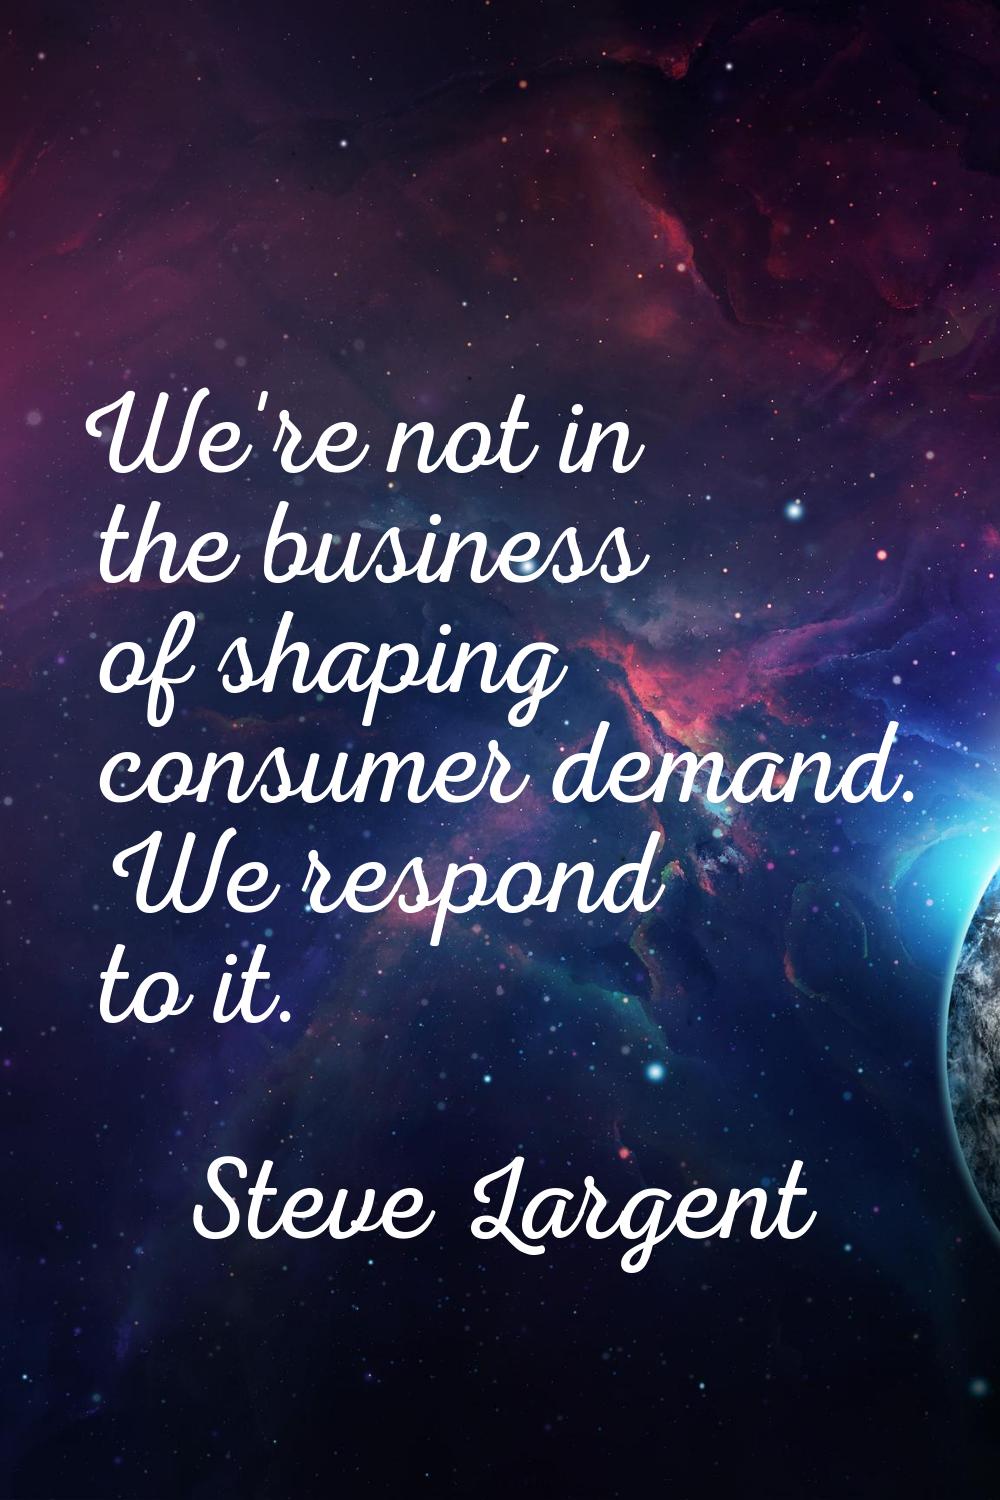 We're not in the business of shaping consumer demand. We respond to it.